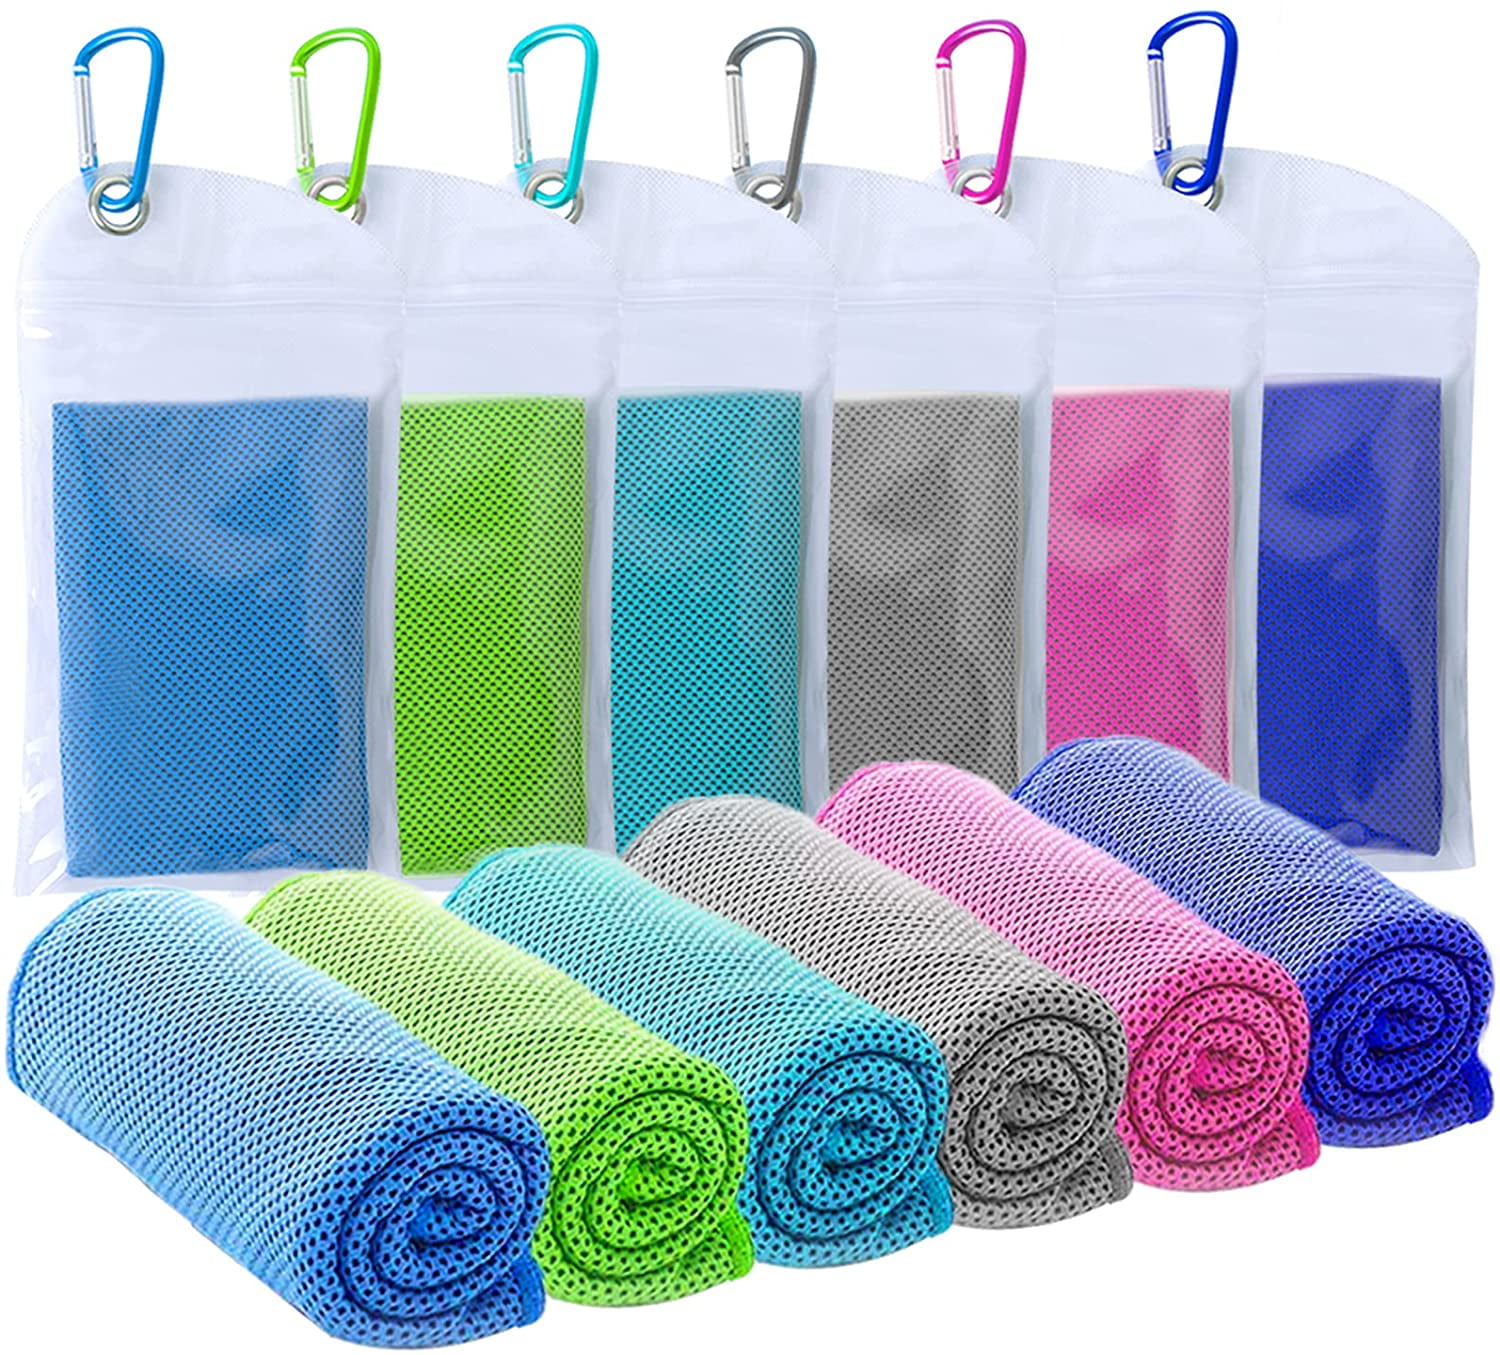 Gym Bowling Golf Camping Yoga Fitness Your Choice Cooling Towel Workout Hiking Travel Outdoor Sports Towel for Instant Cooling Relief 